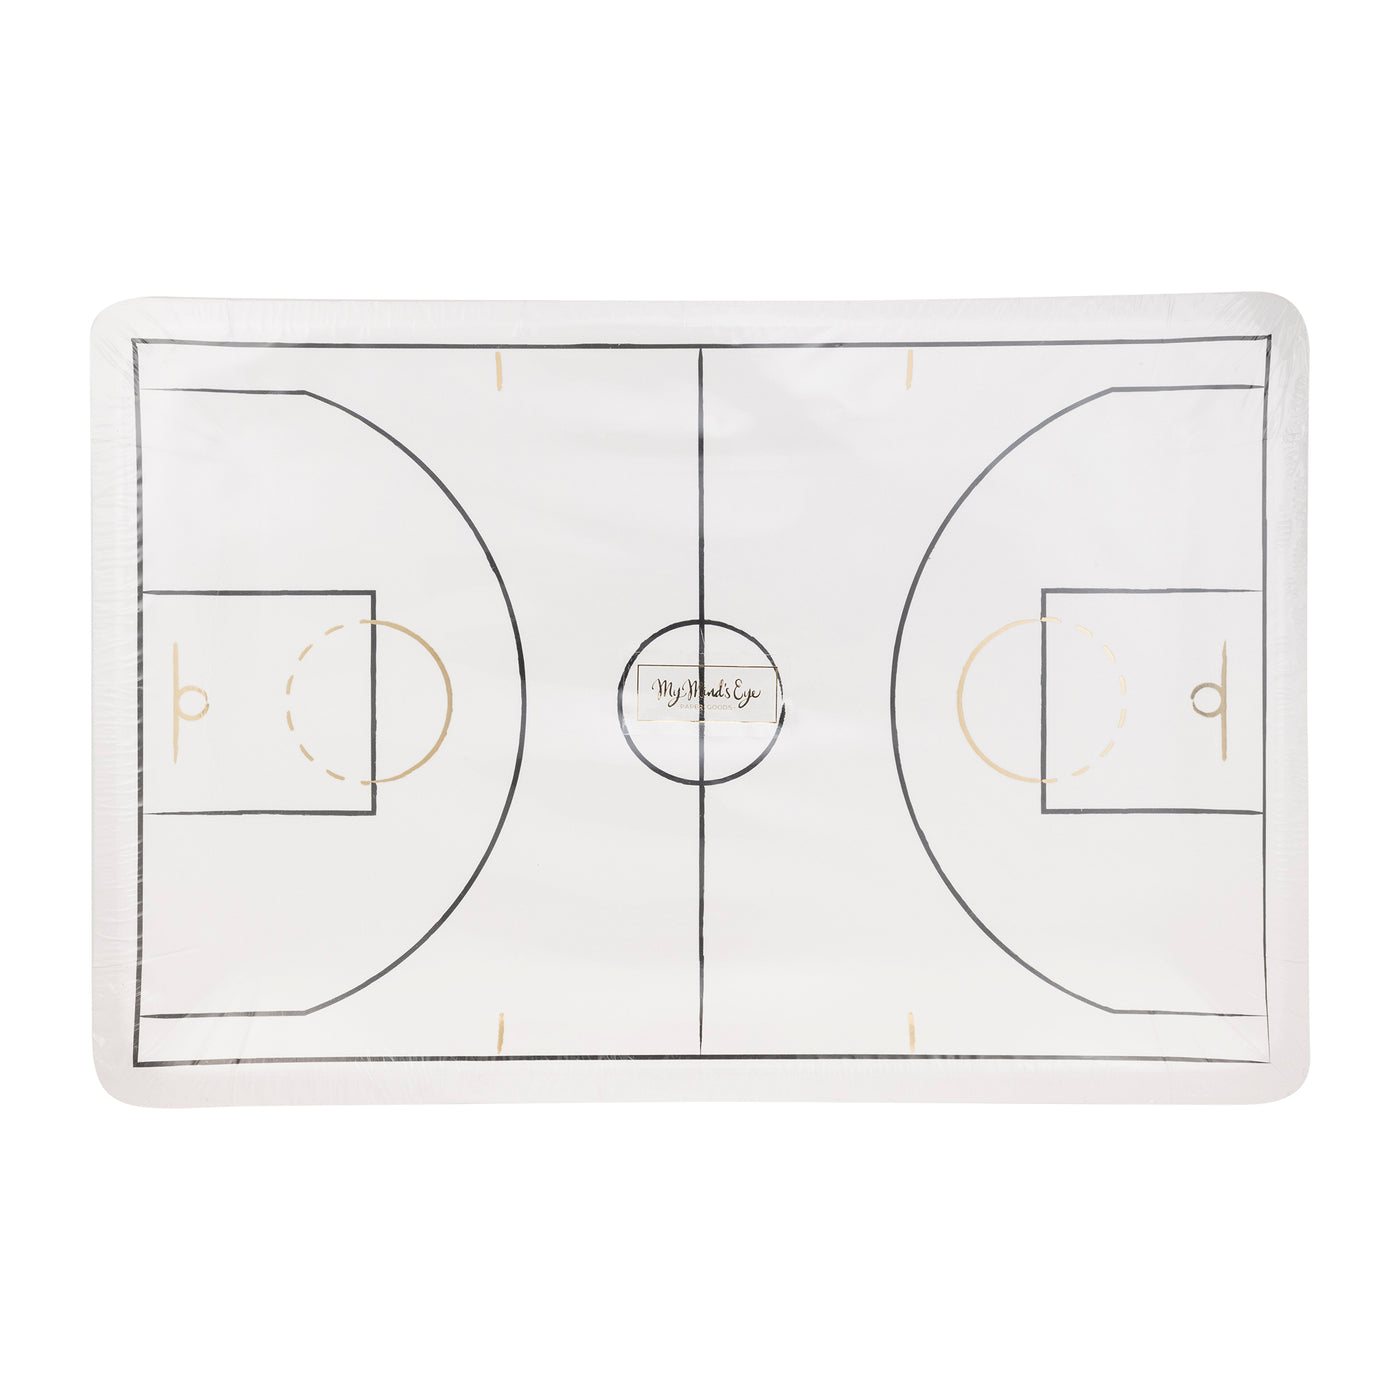 BBL1041 - Basketball Court Shaped Paper Plate